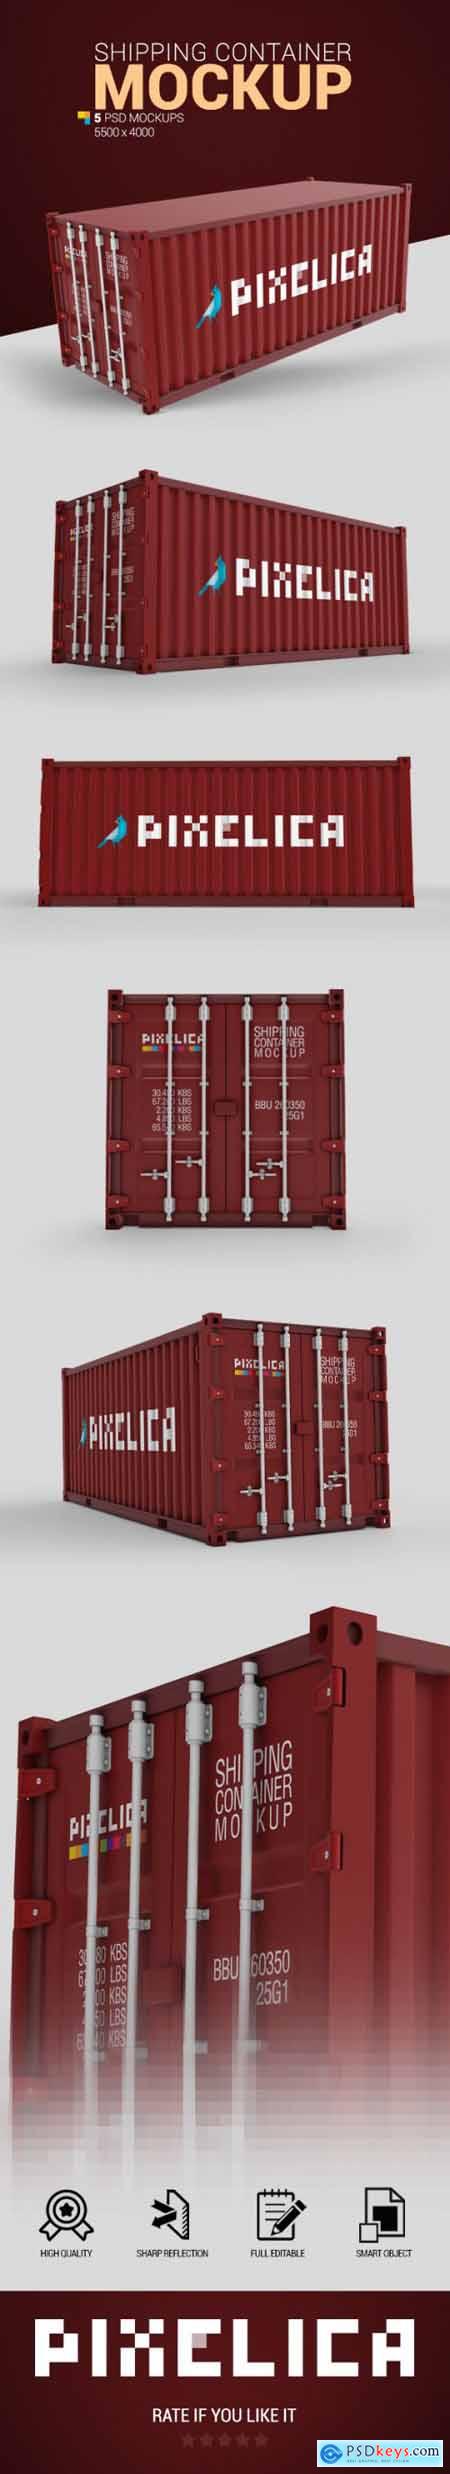 Shipping Container Mockup Free Download Photoshop Vector Stock Image Via Torrent Zippyshare From Psdkeys Com